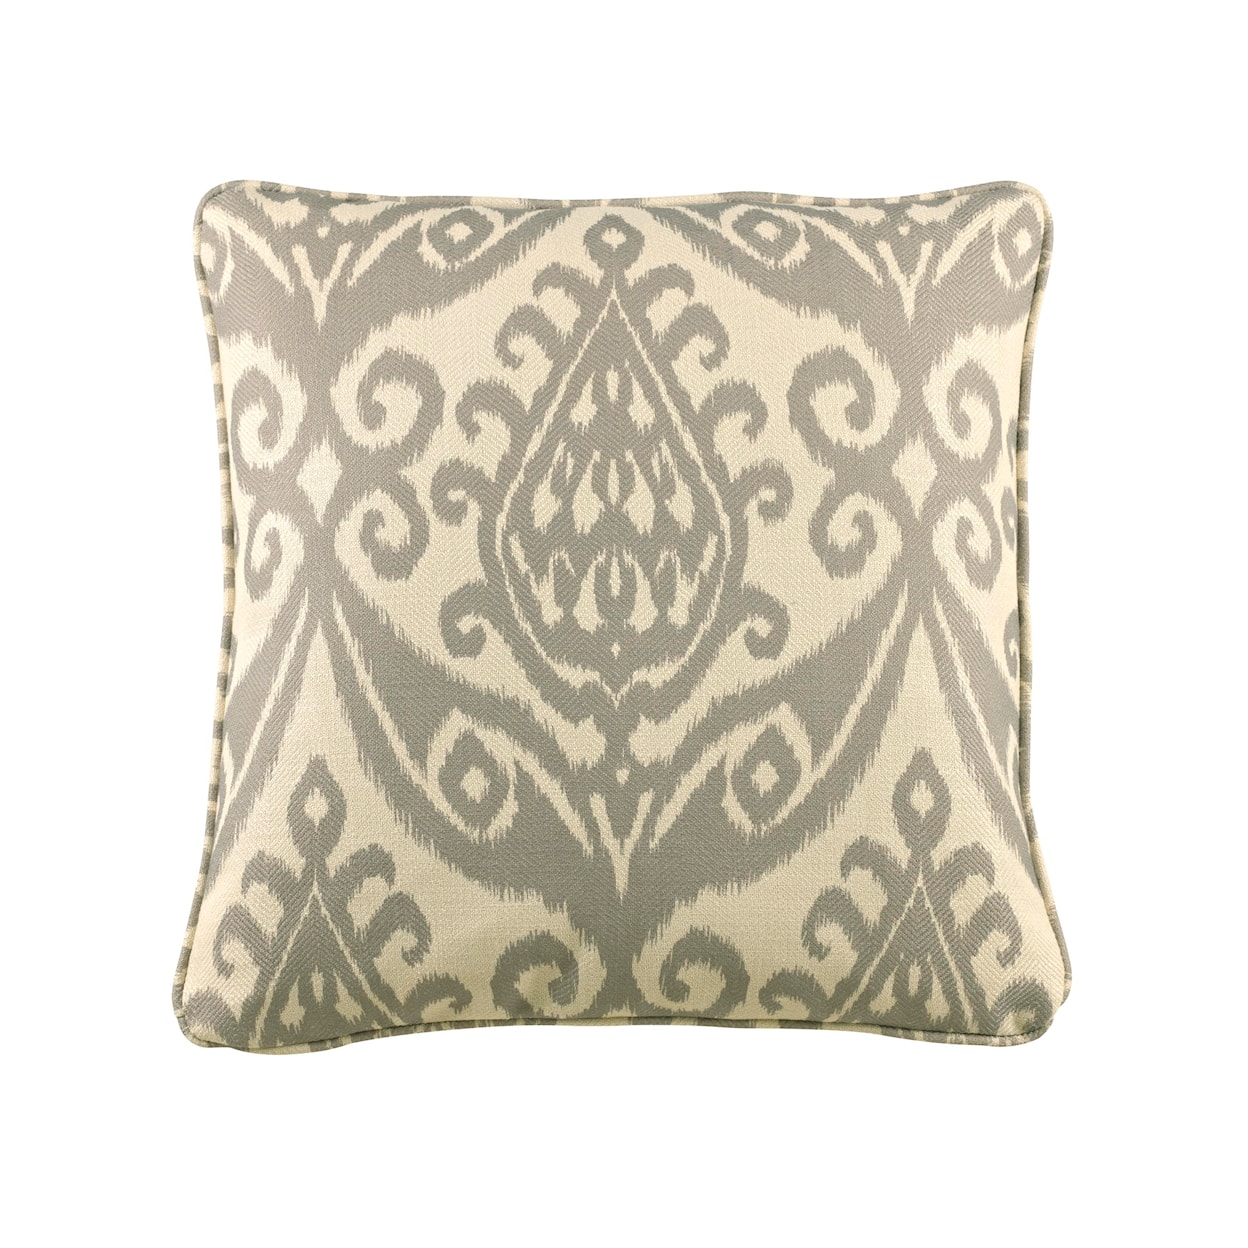 Ashley Furniture Signature Design Pillows Brynlee - Natural, Set of 6